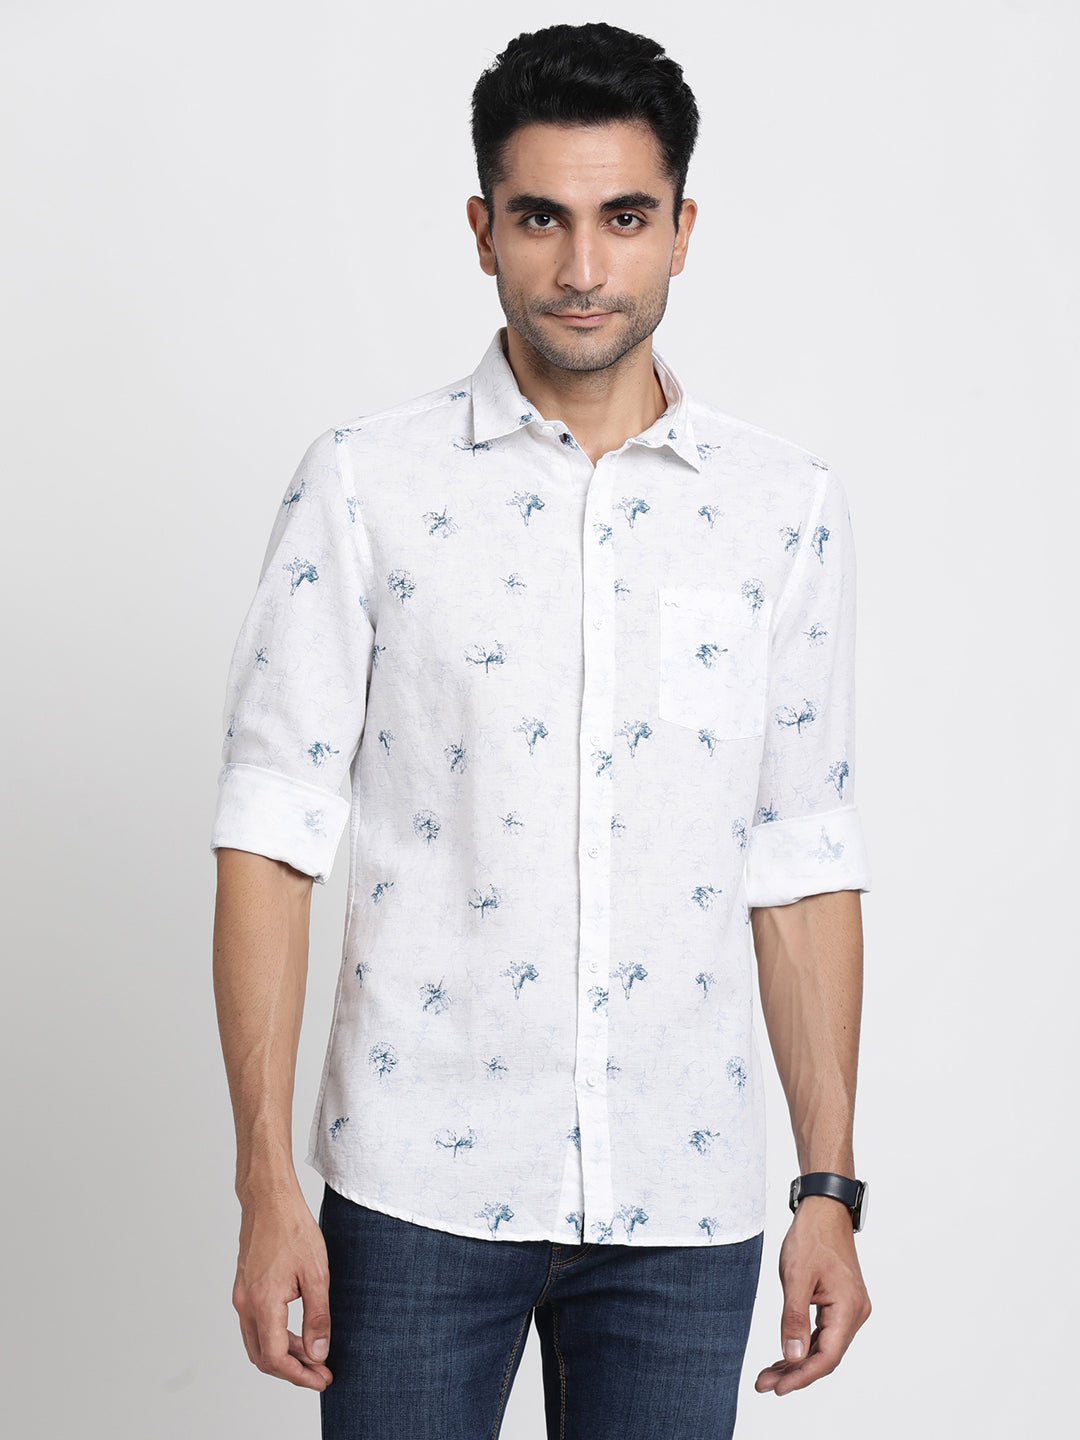 Cotton Linen White Printed Slim Fit Full Sleeve Casual Shirt